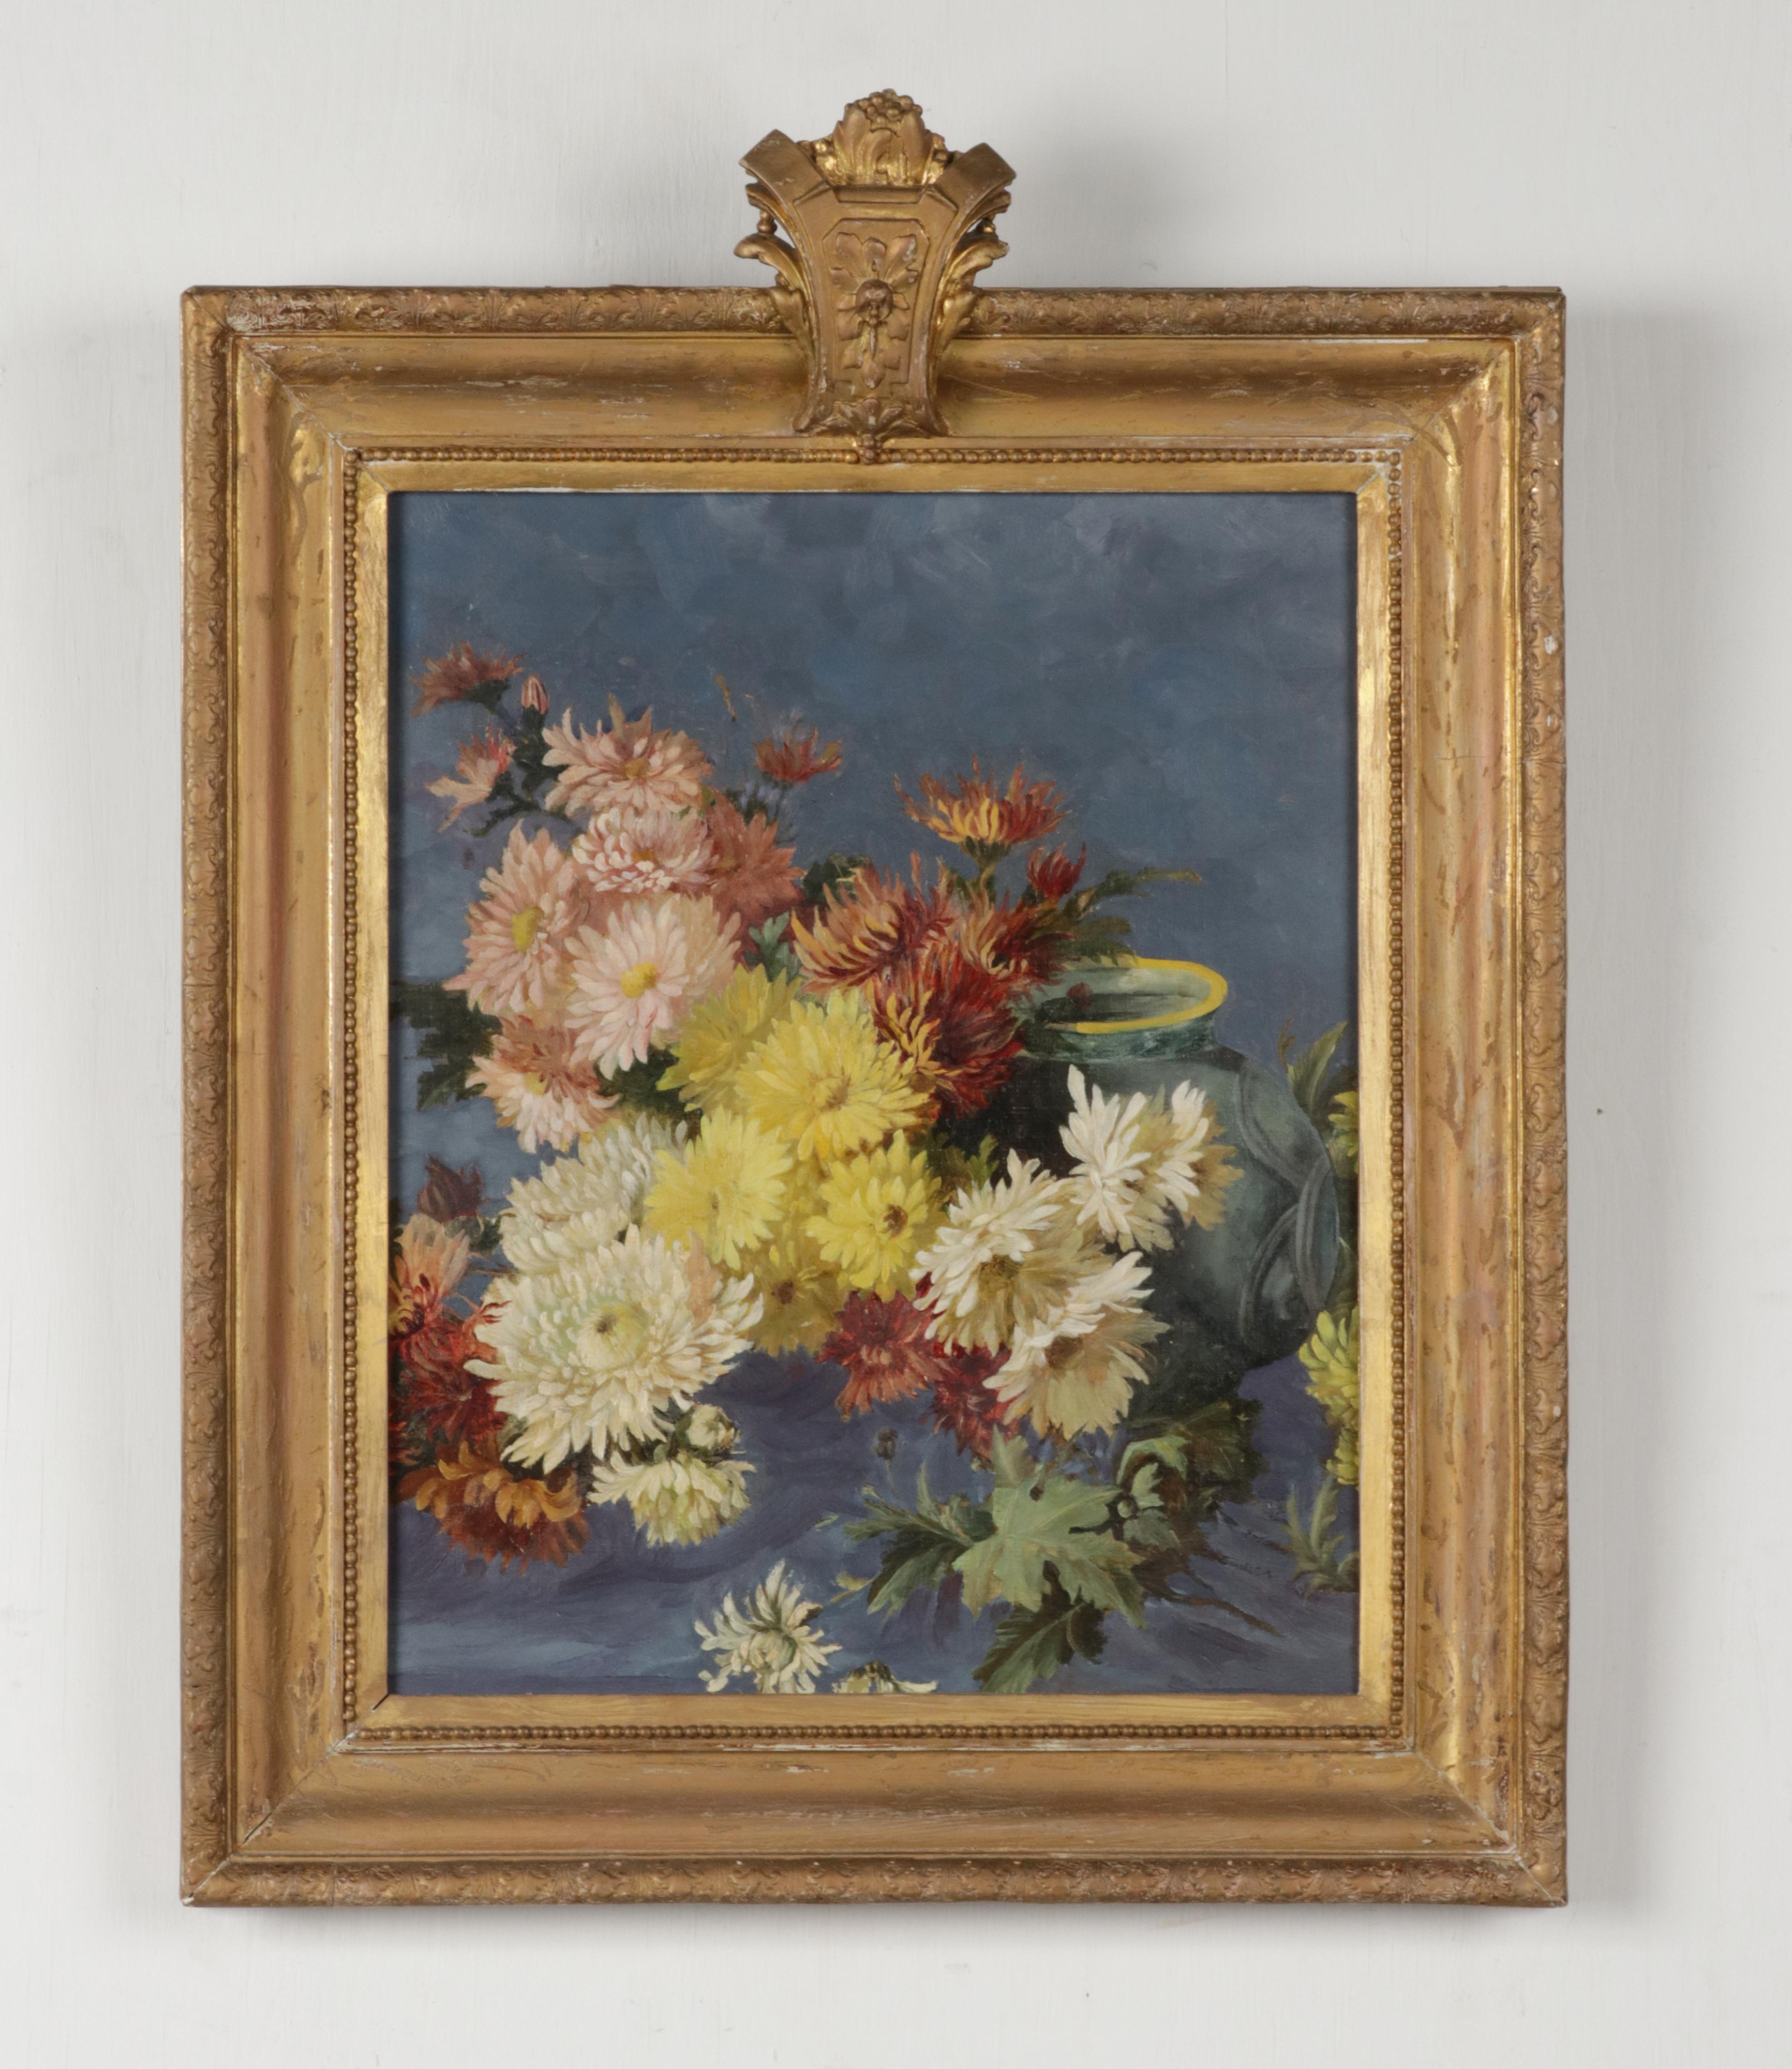 Romantic Mid Century Flower Still Life Oil Painting with Antique Frame For Sale